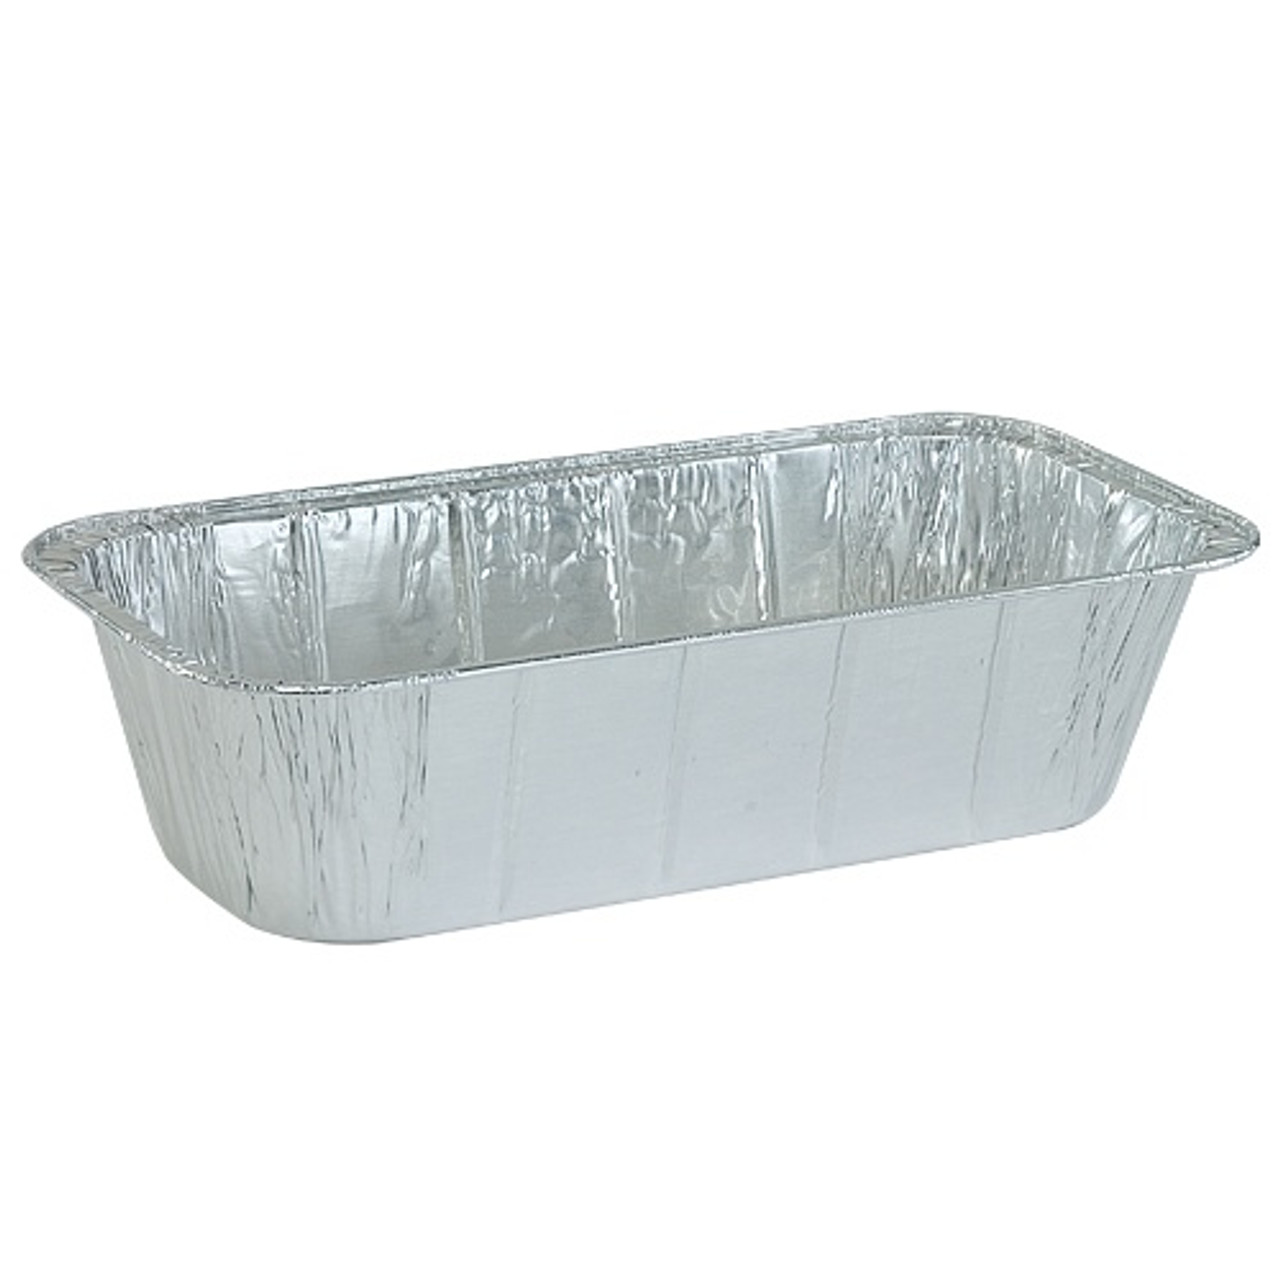 https://cdn11.bigcommerce.com/s-hgqmwywp99/images/stencil/1280x1280/products/49076/43867/5-lb-loaf-aluminum-disposable-pans-case-of-100-3__50481.1675880301.jpg?c=1?imbypass=on